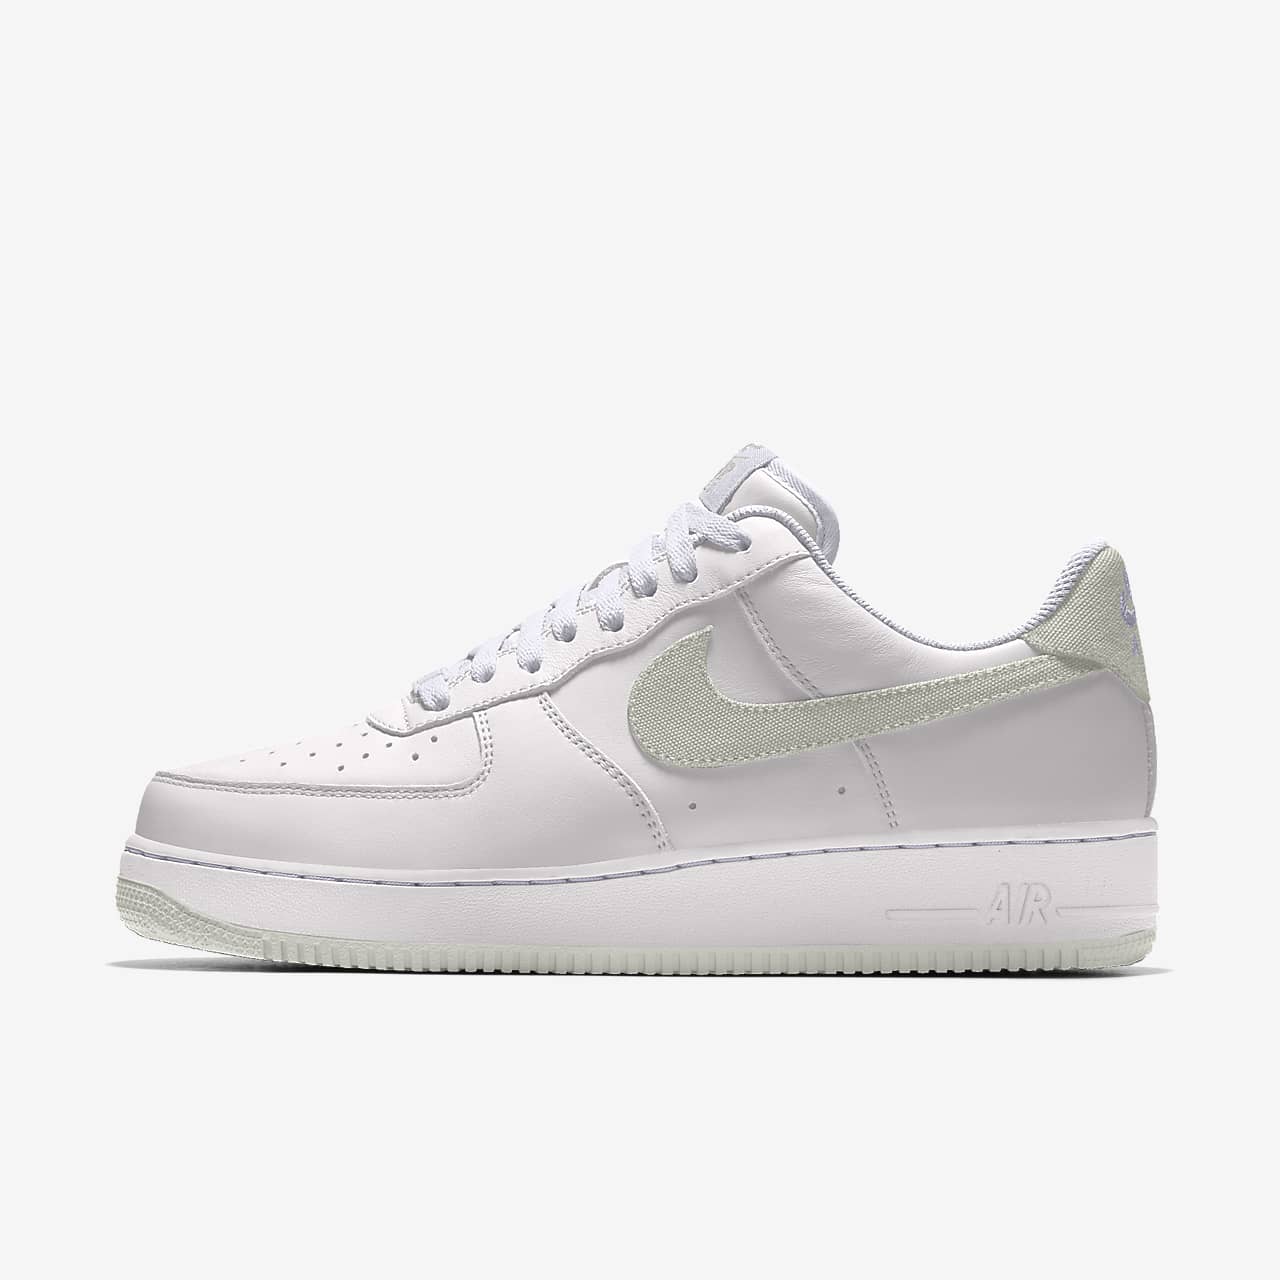 Chaussure personnalisable Nike Air Force 1 Low By You pour femme. Nike FR